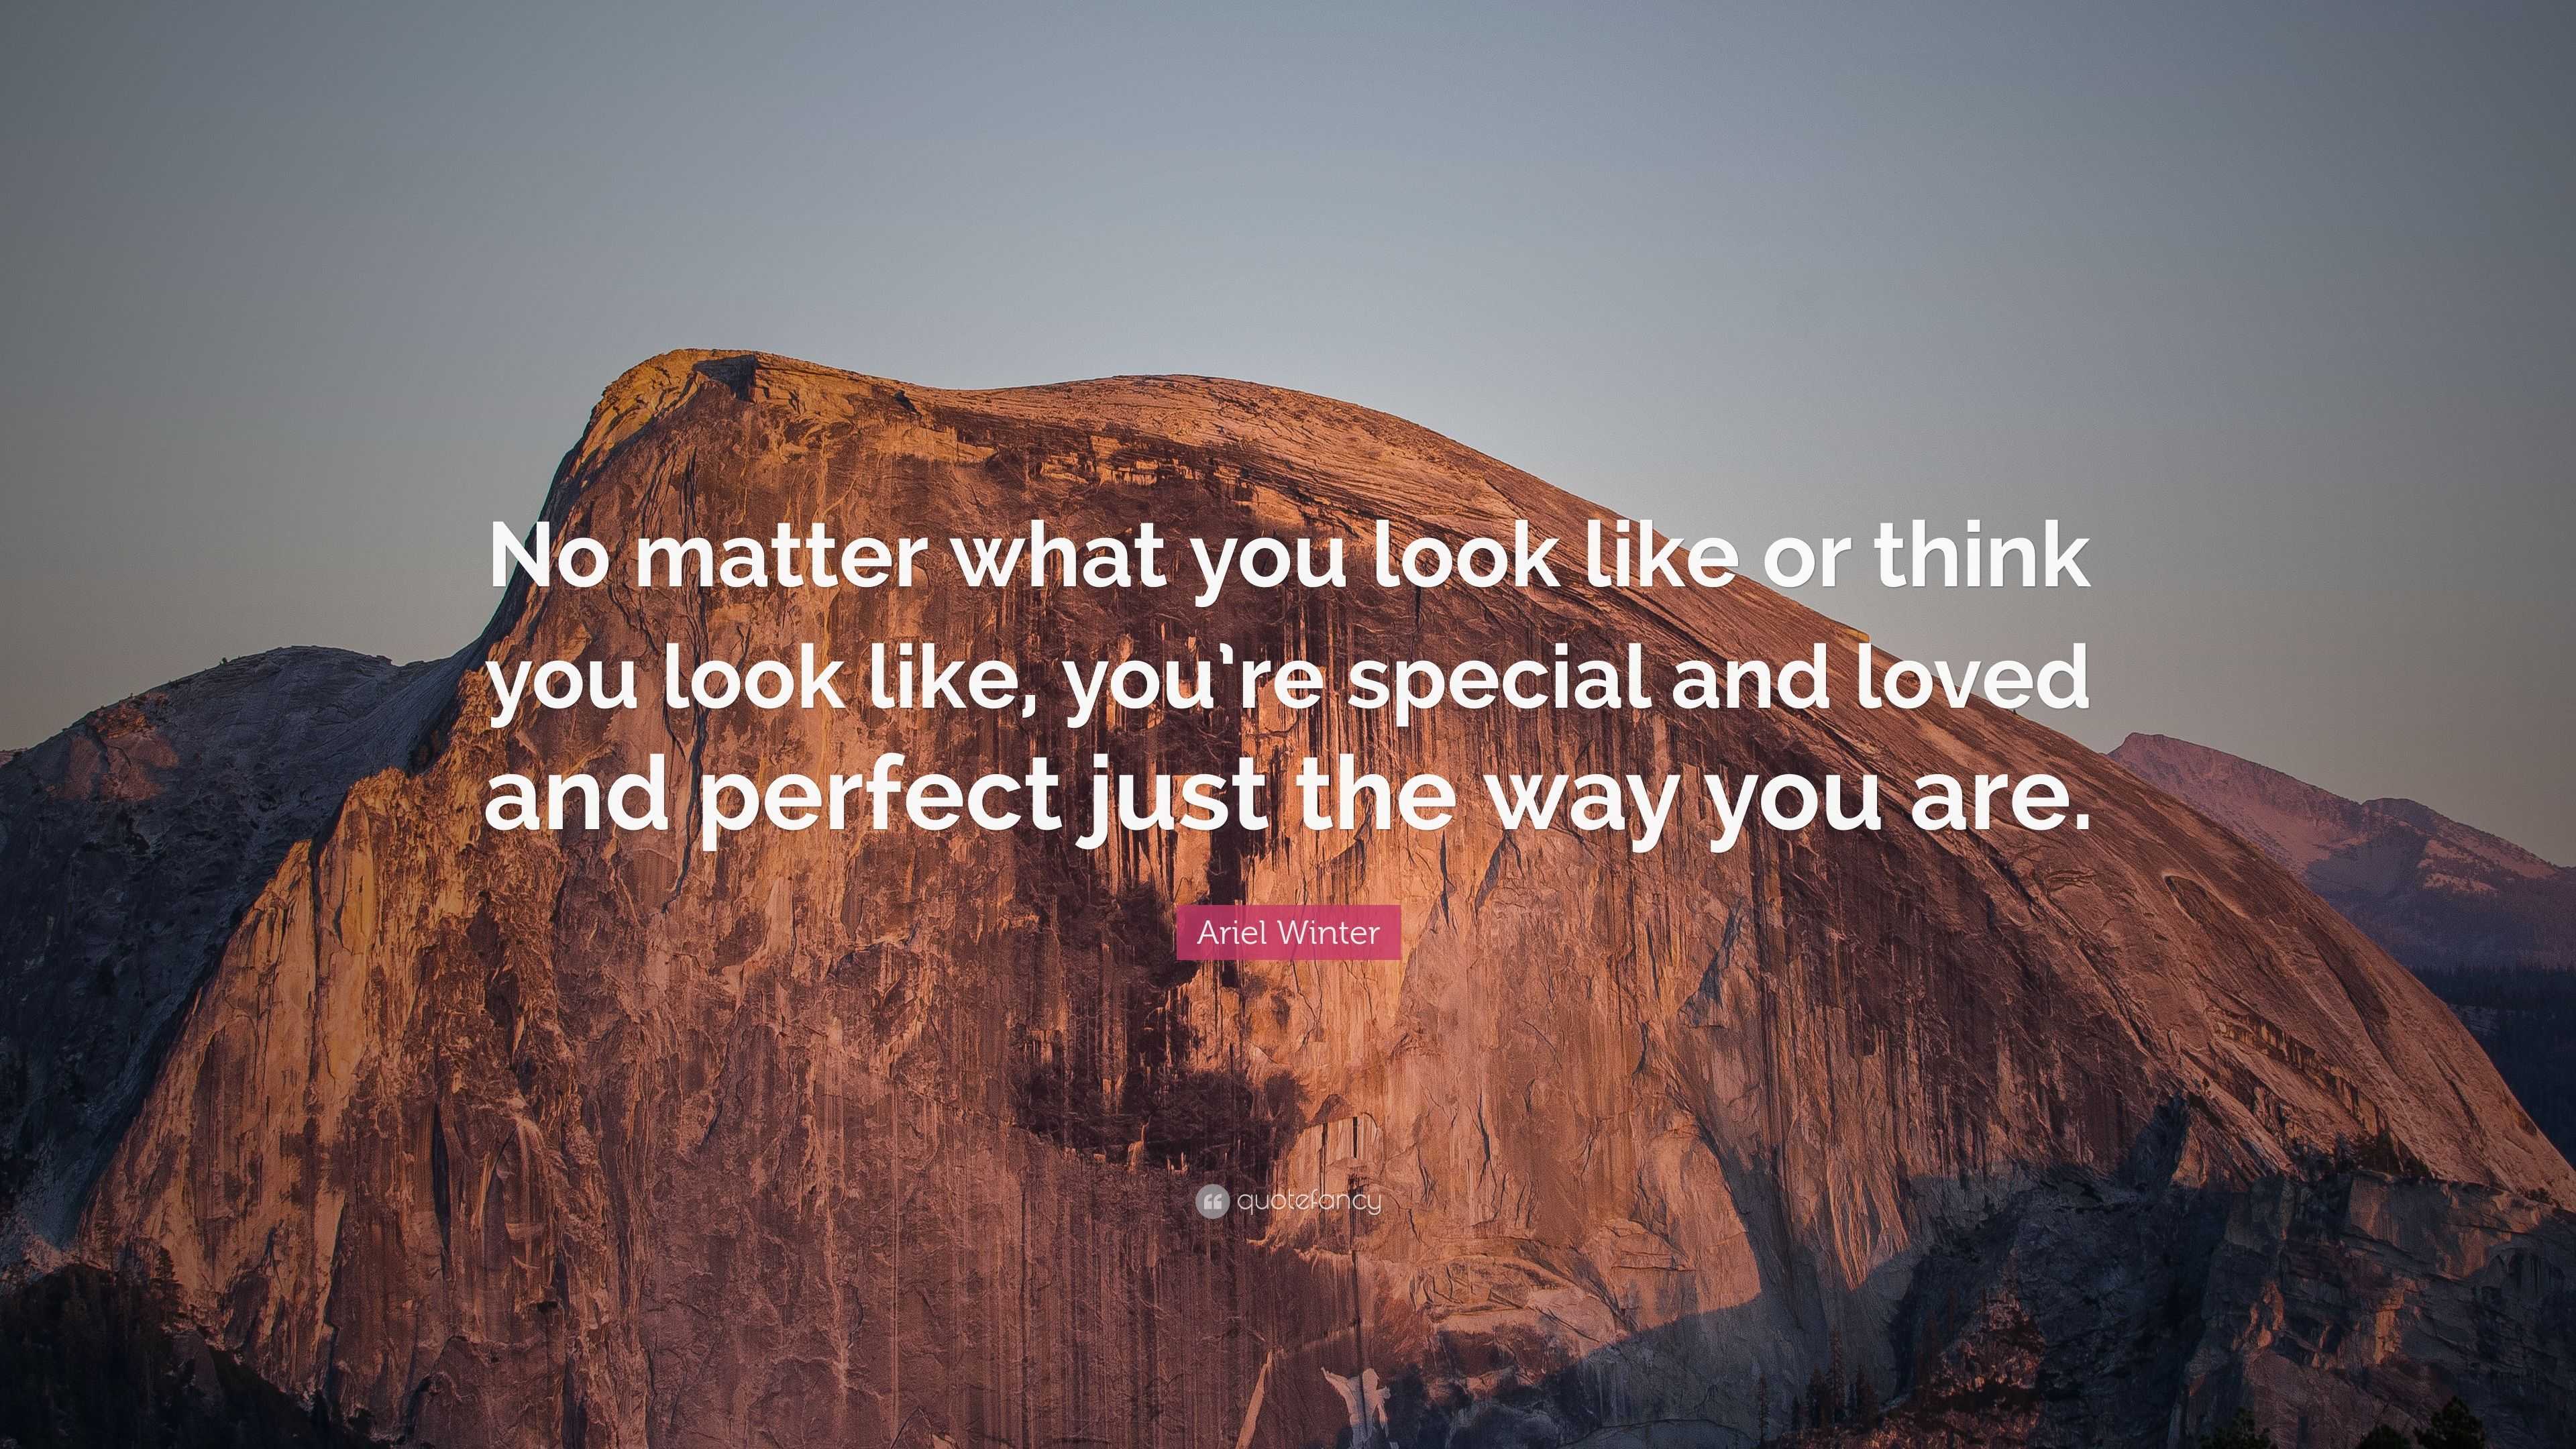 Ariel Winter Quote: “No matter what you look like or think you look ...